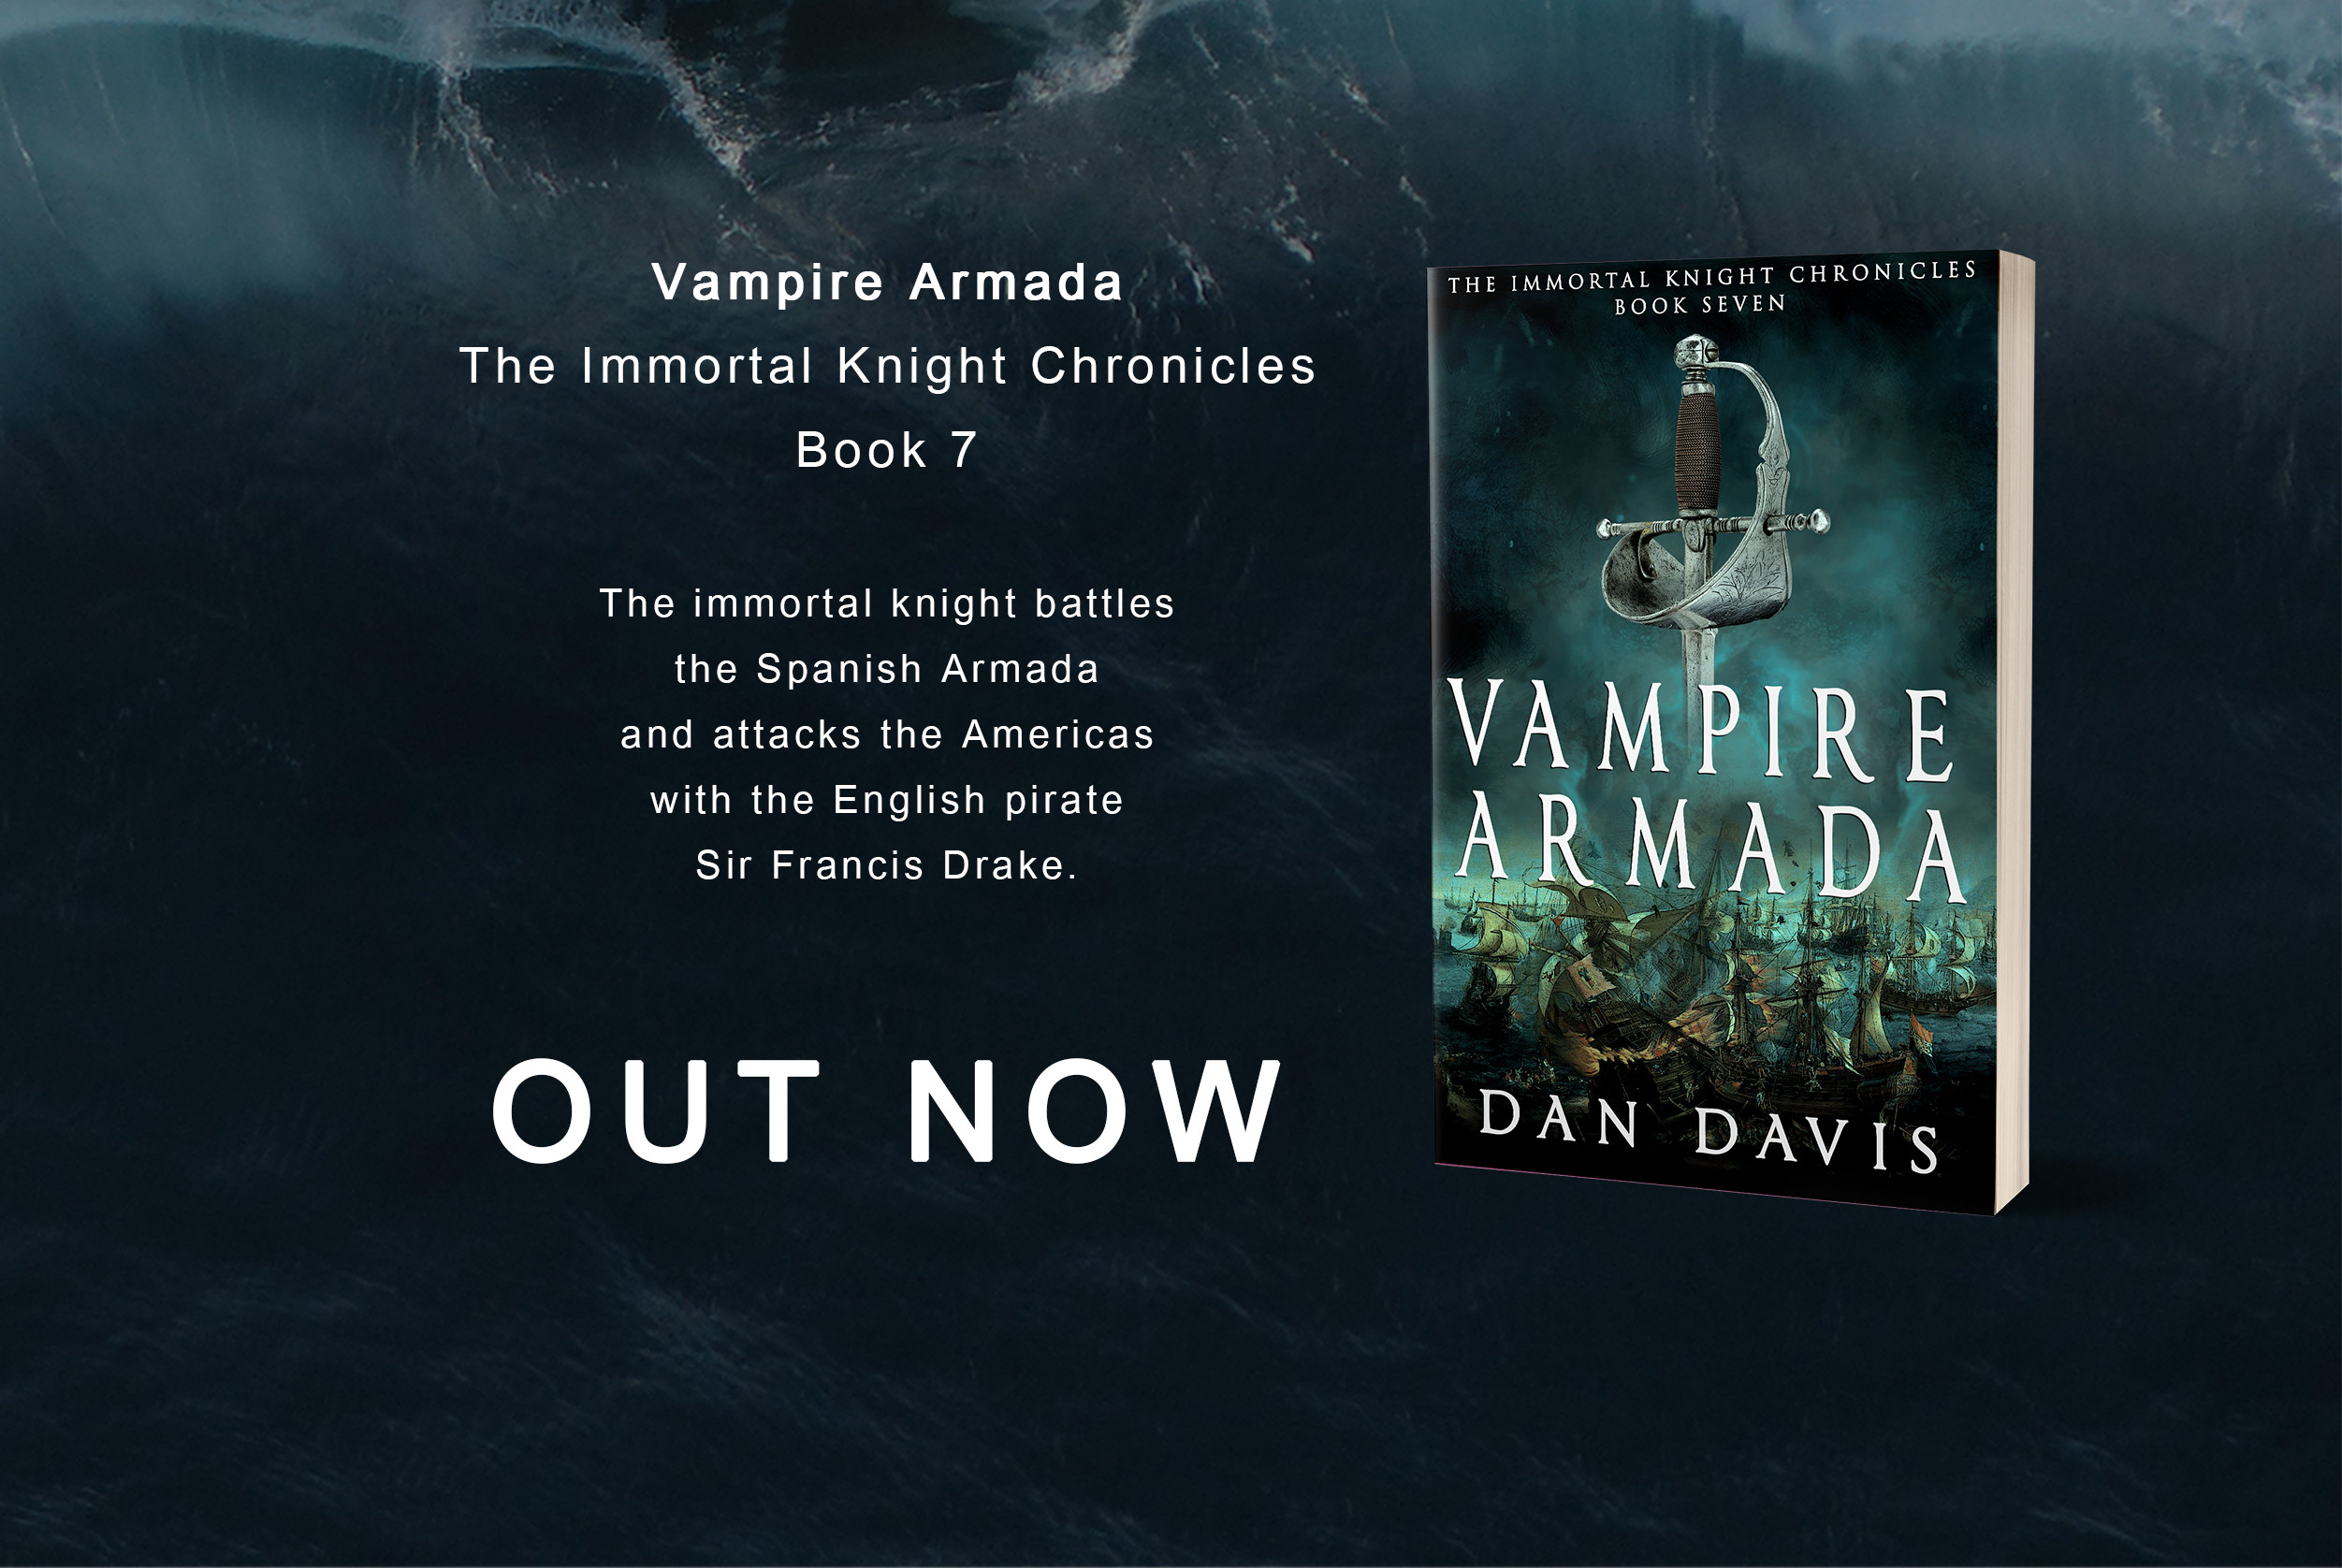 New Release – Vampire Armada is Out Now